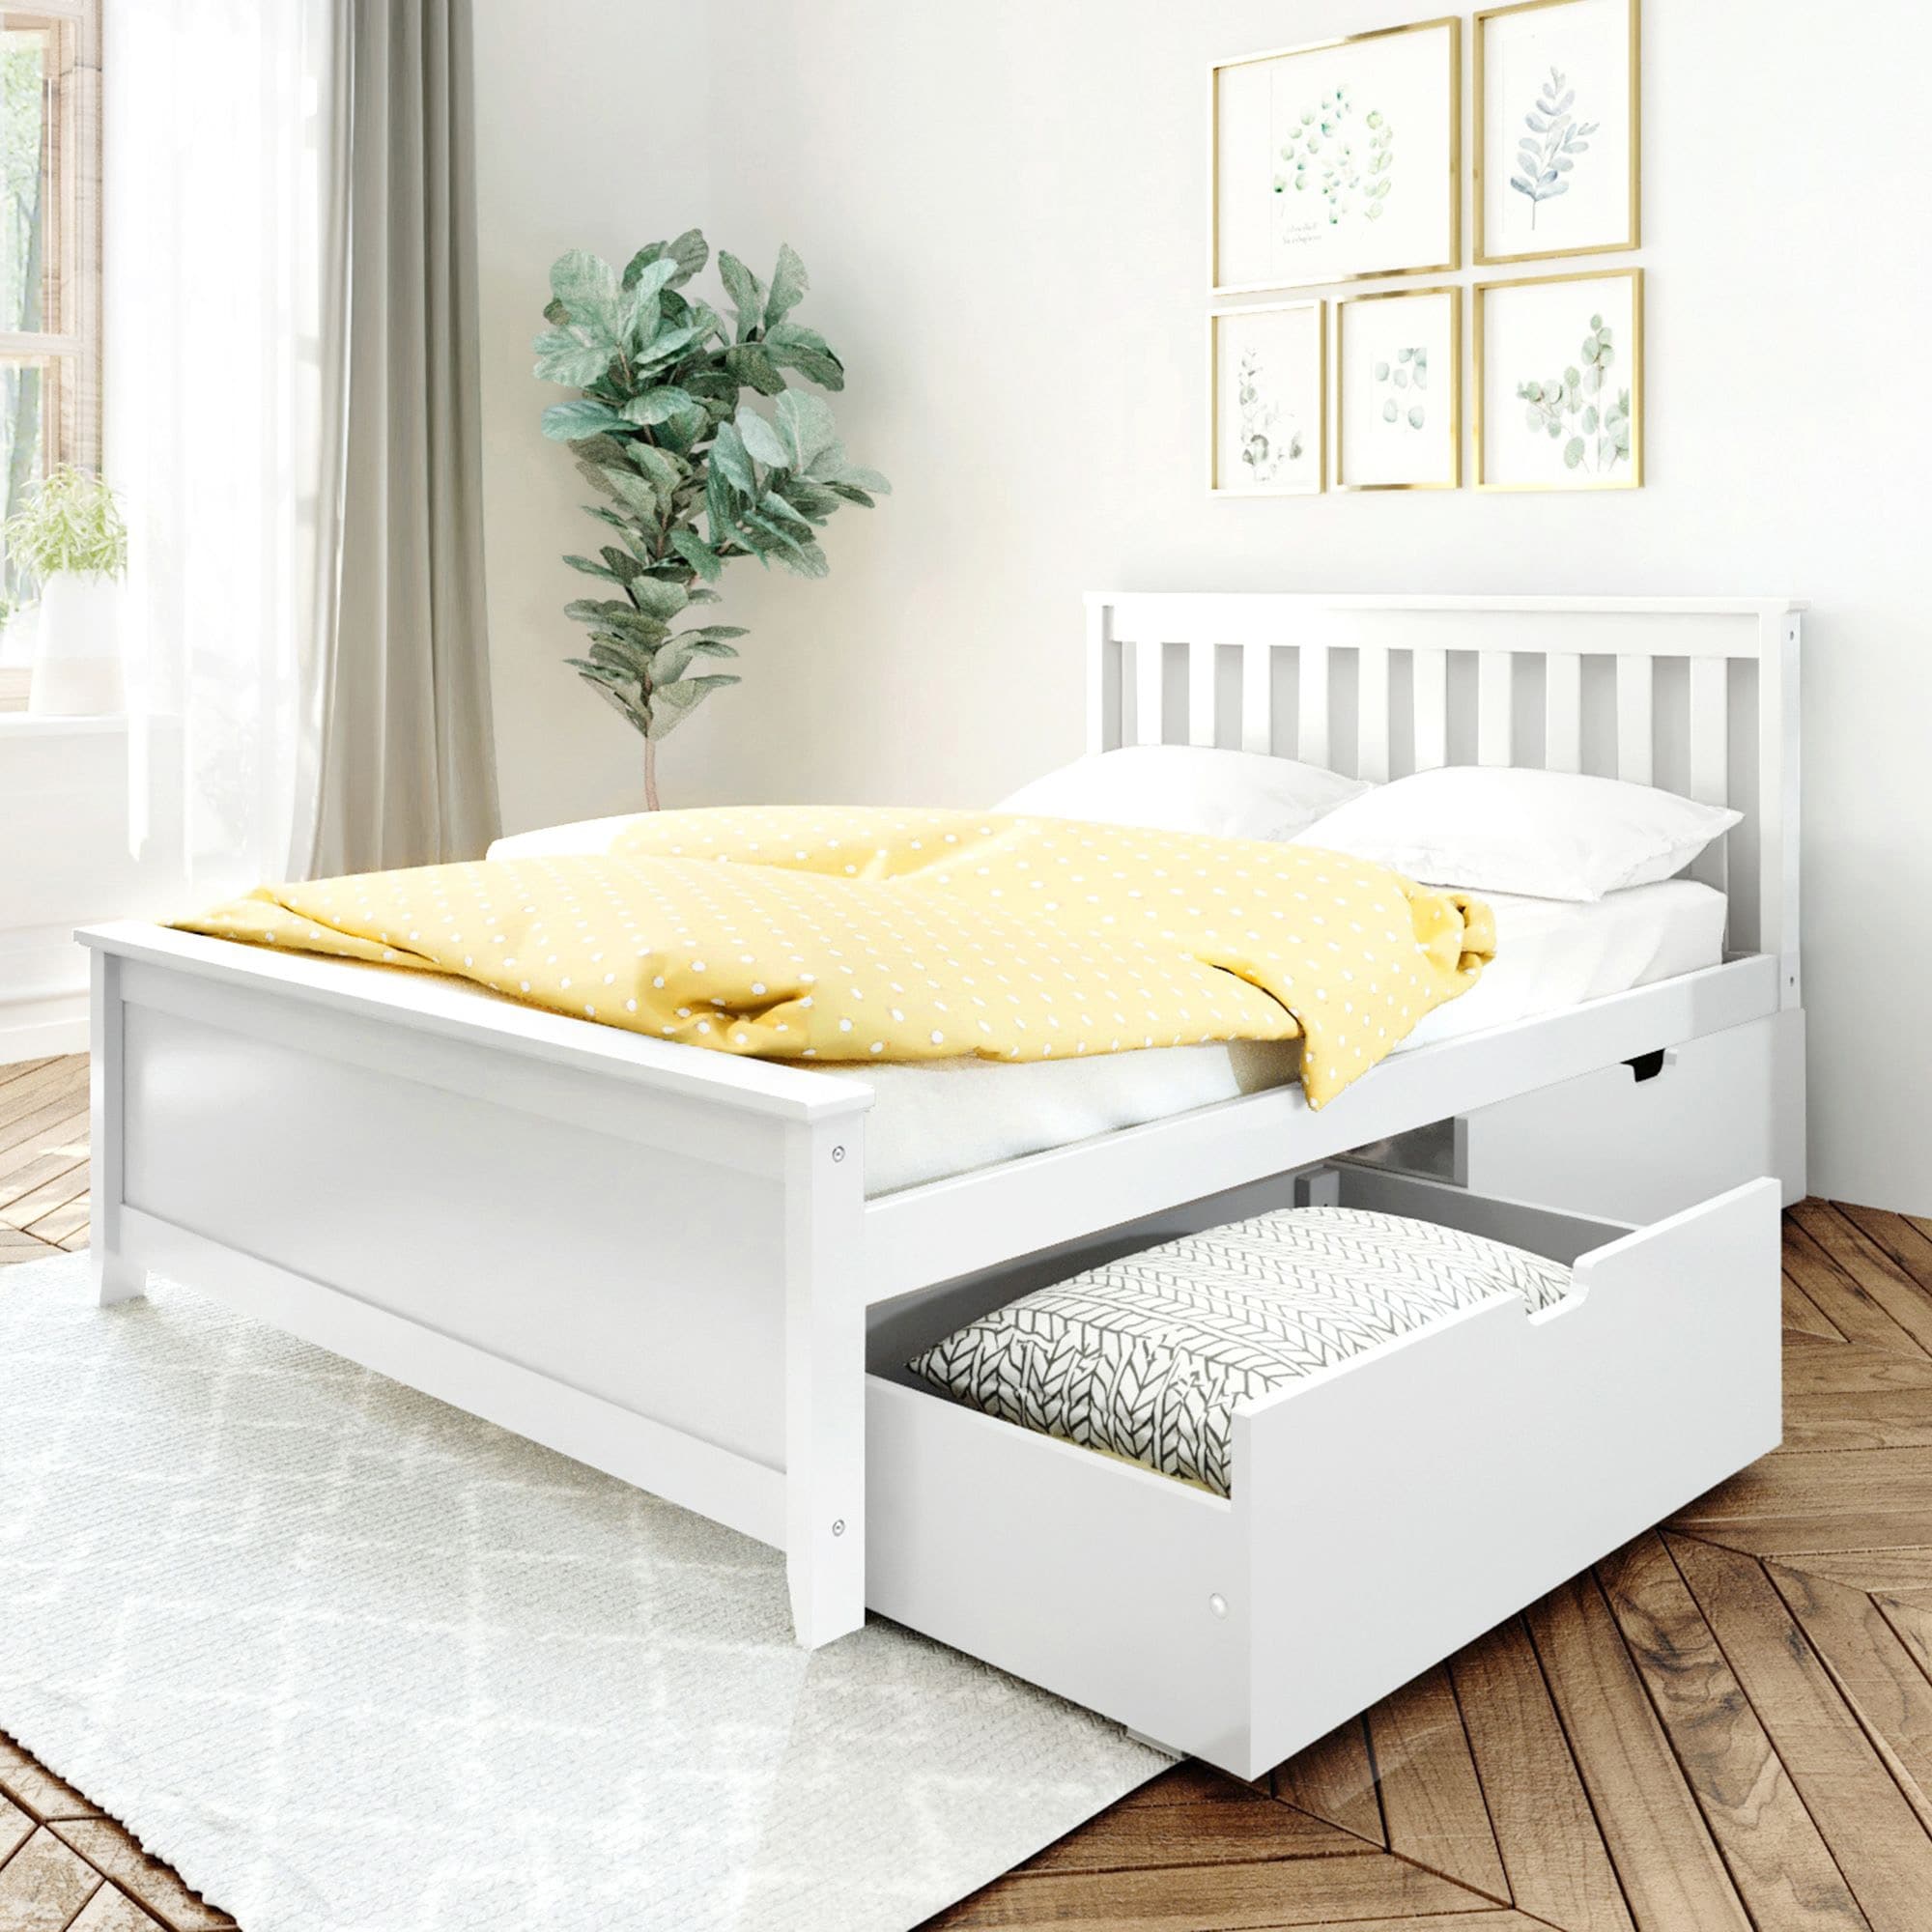 https://ak1.ostkcdn.com/images/products/is/images/direct/cc2273c477e88c04c47dc7586ebefb3e14ed6a07/Max-%26-Lily-Full-Bed-with-Under-Bed-Storage-Drawers.jpg